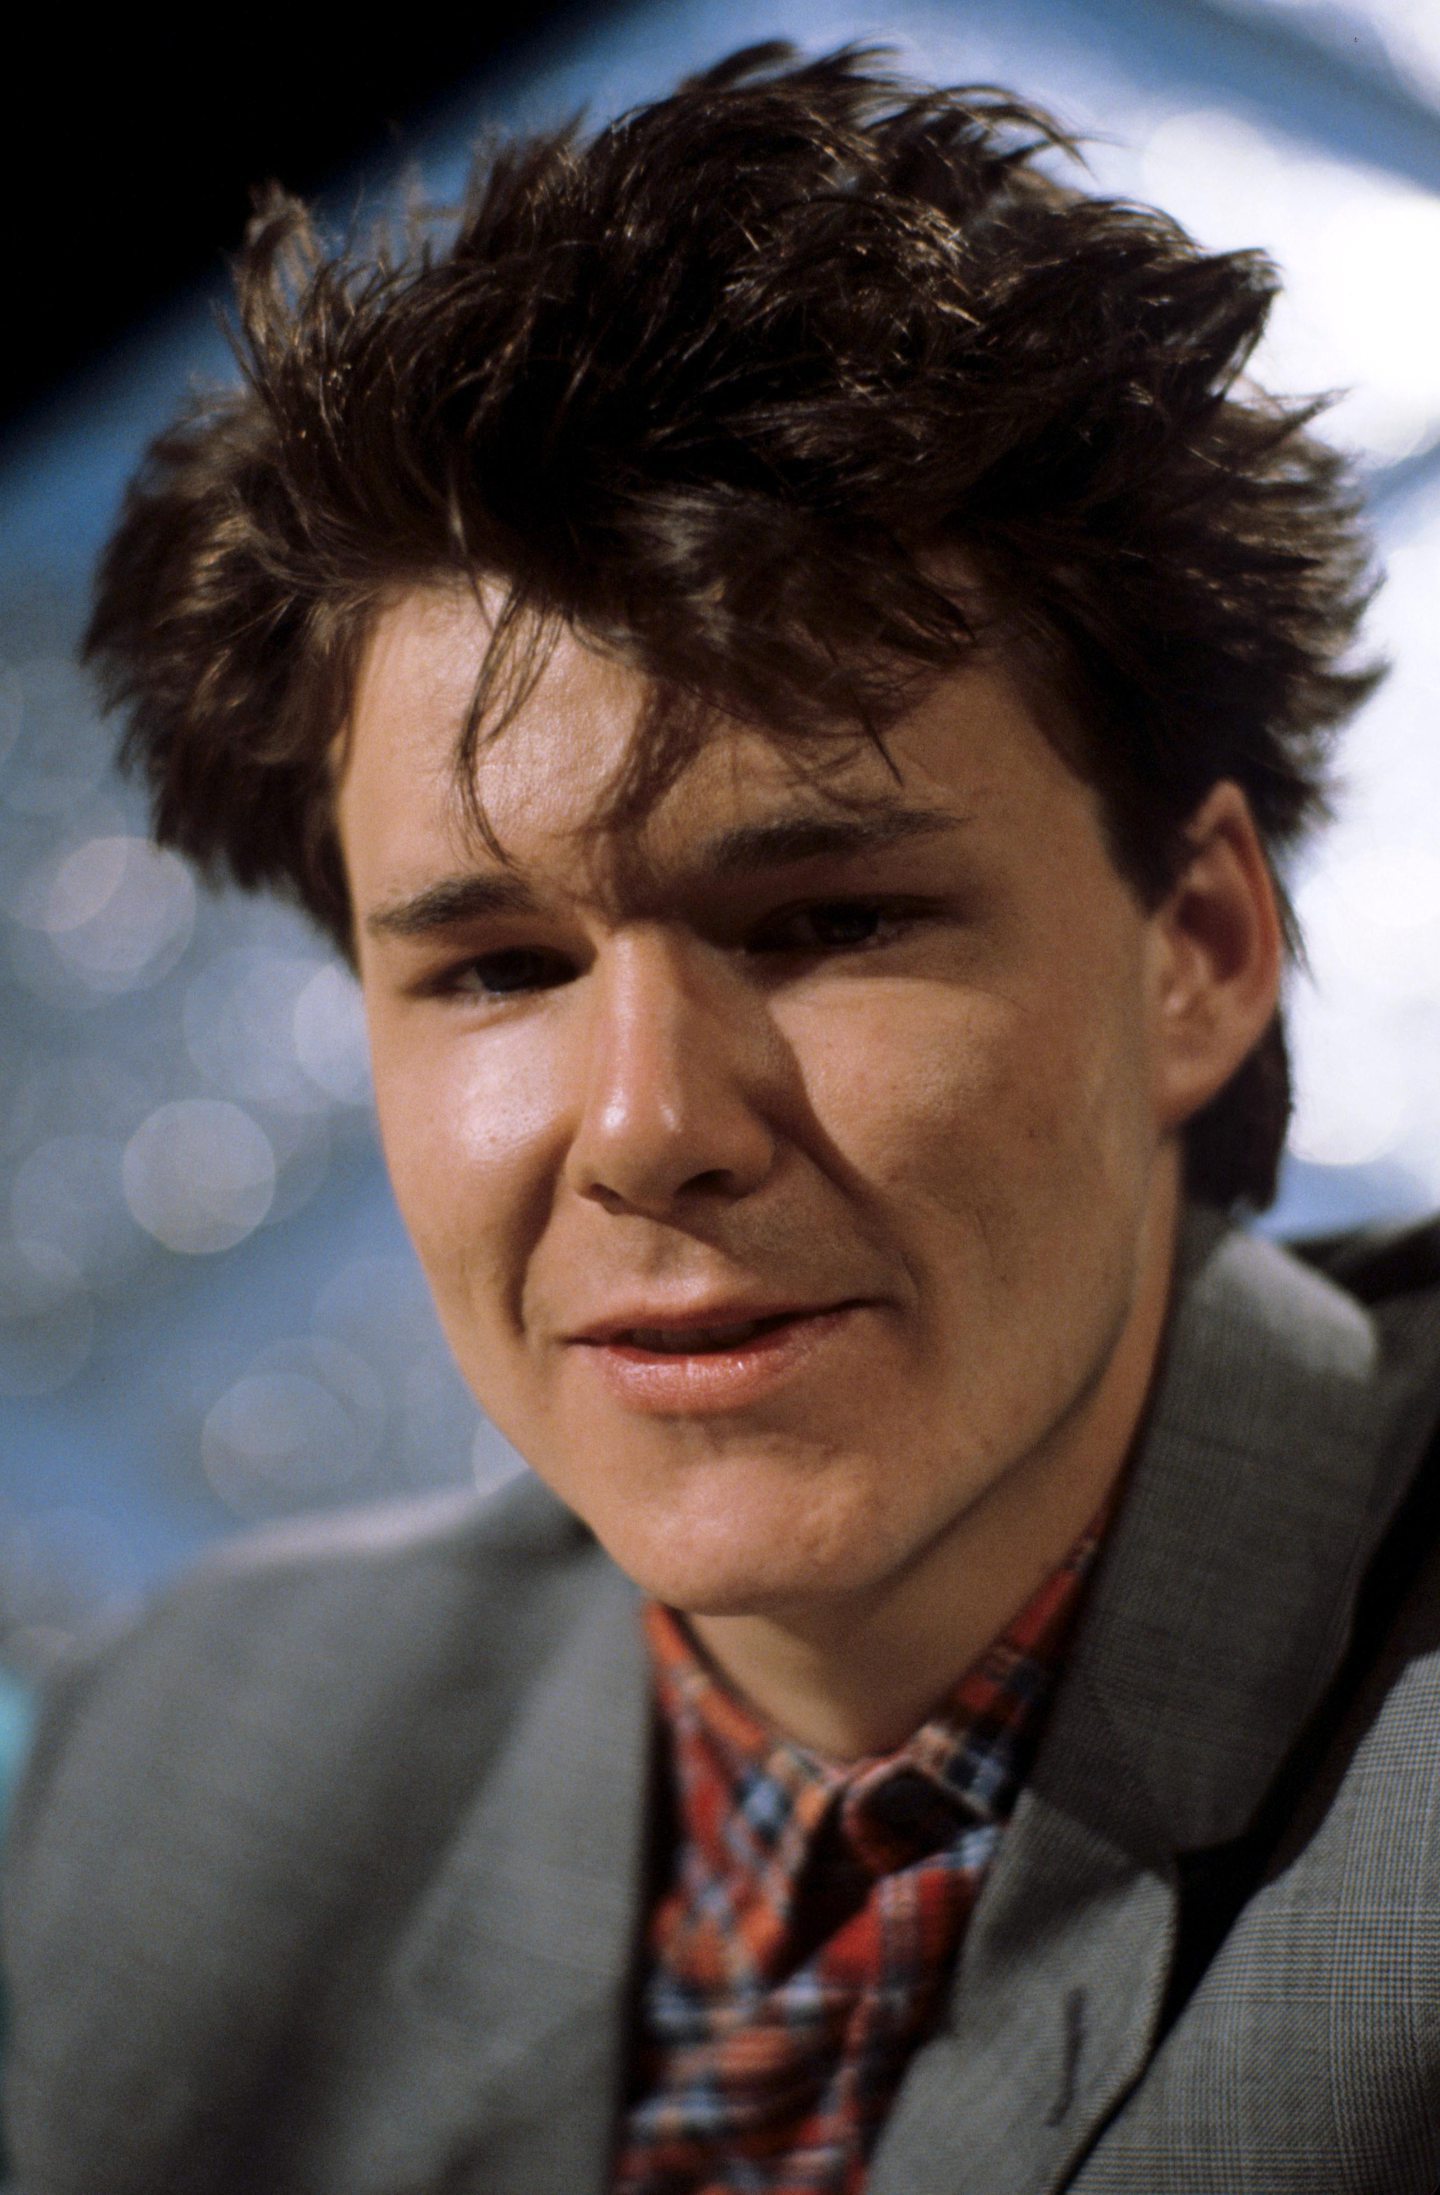 The iconic Stuart Adamson became the voice of a generation in the 1980s with Big Country. Image: Shutterstock.